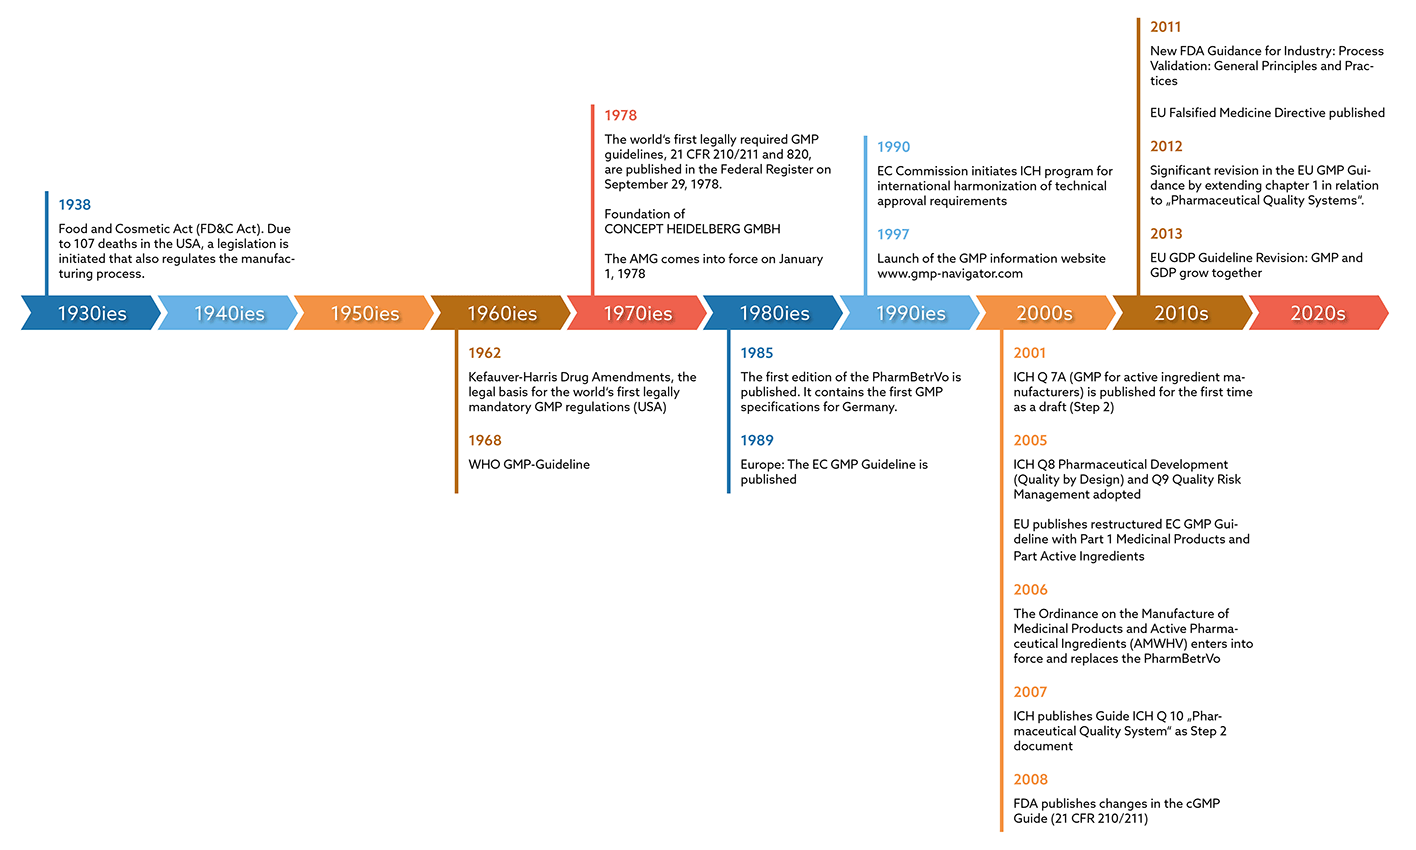 Timeline of the origin of Good Manufacturing Practice (GMP)